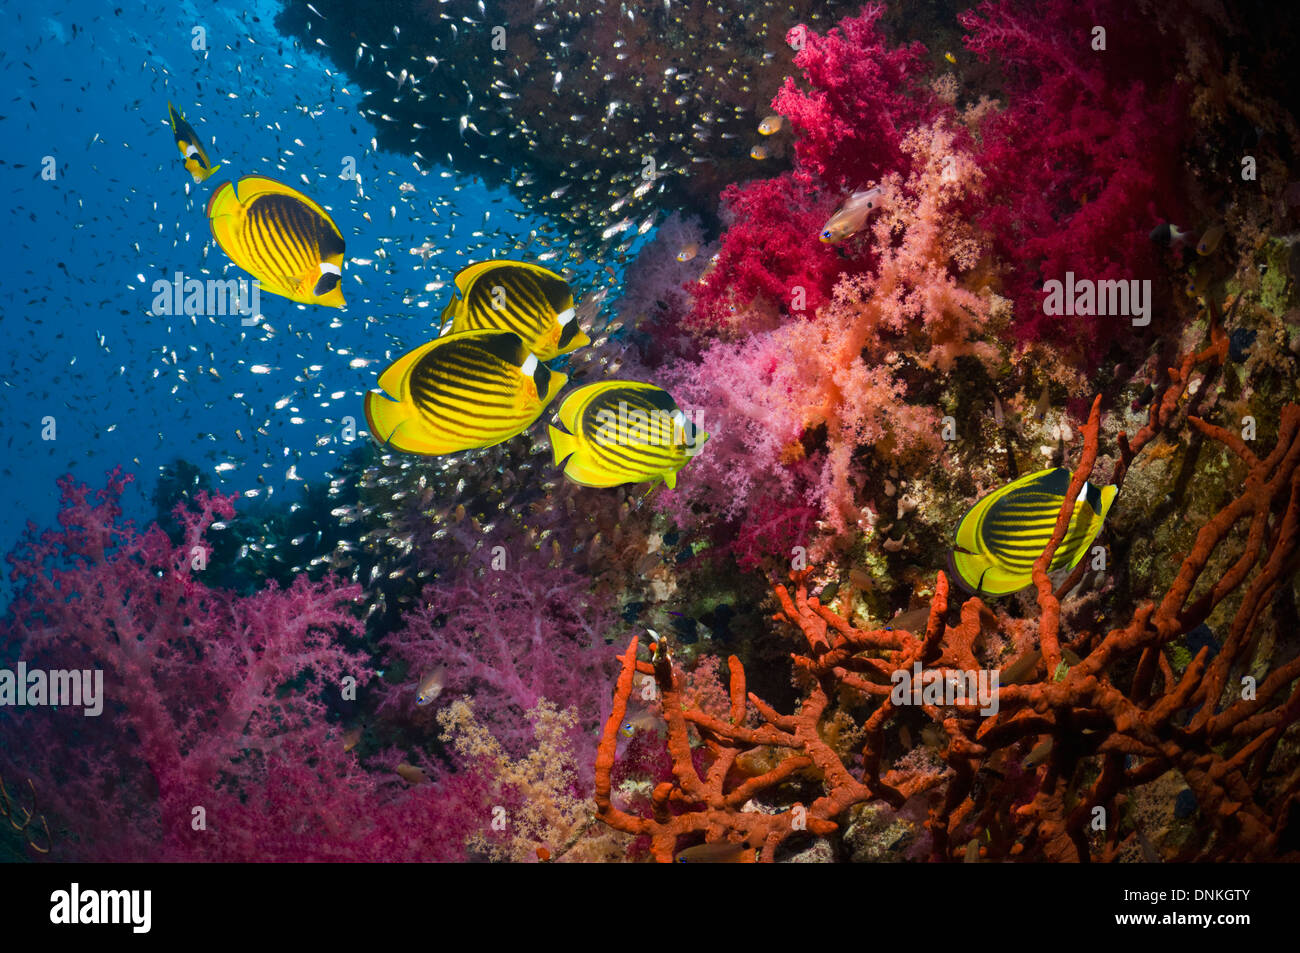 Coral reef scenery with Red Sea raccoon butterflyfish Stock Photo